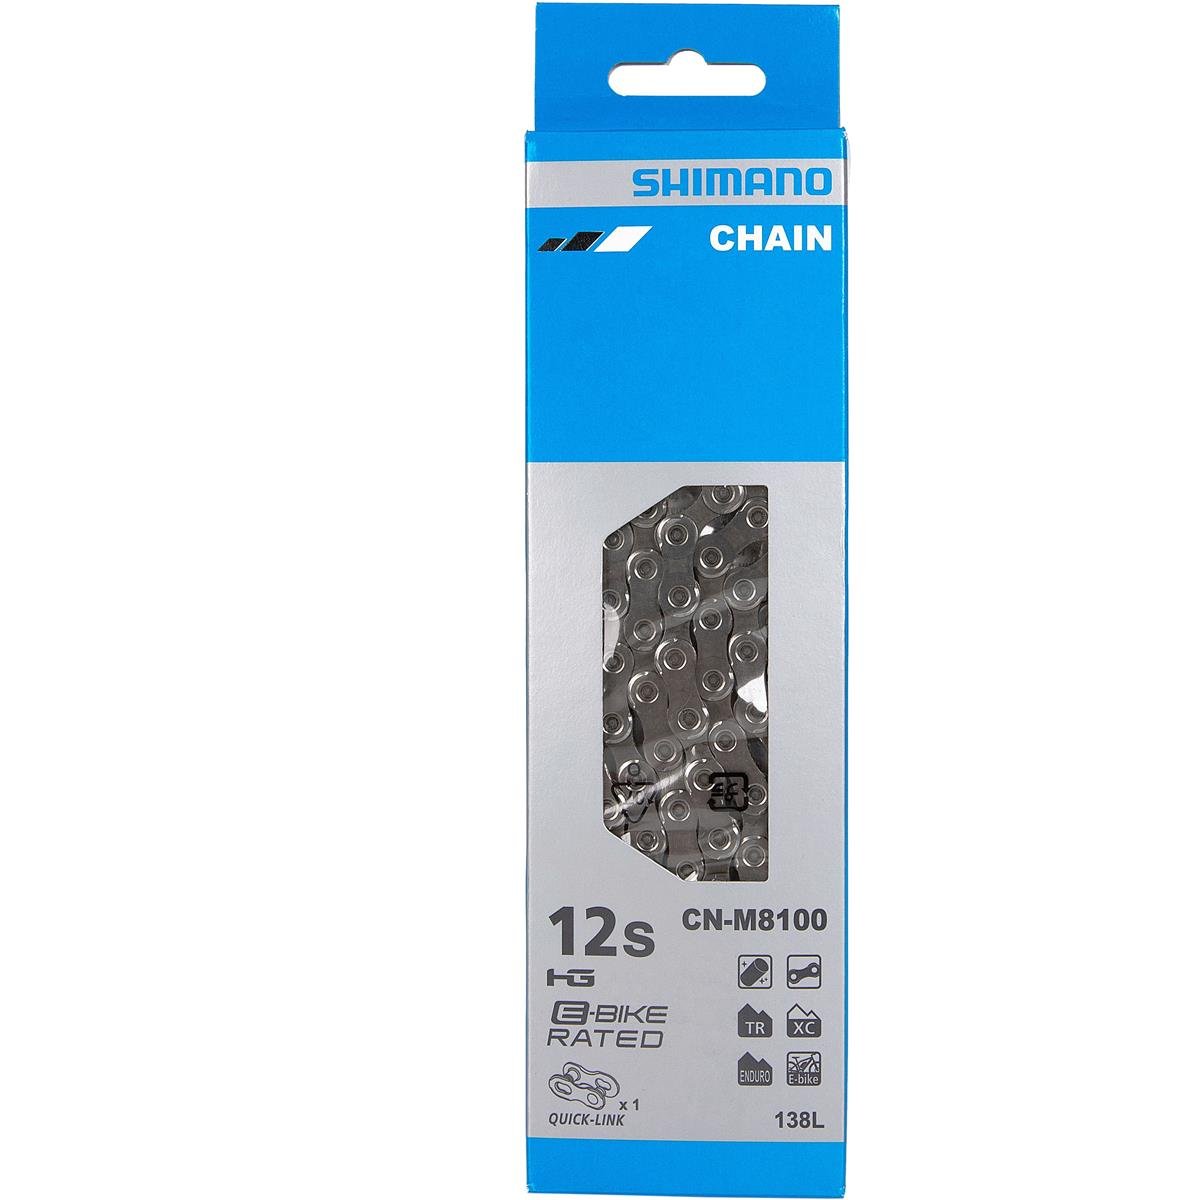 Shimano MTB Chain CN-M8100 138 Links, 12-Speed, with Master Link